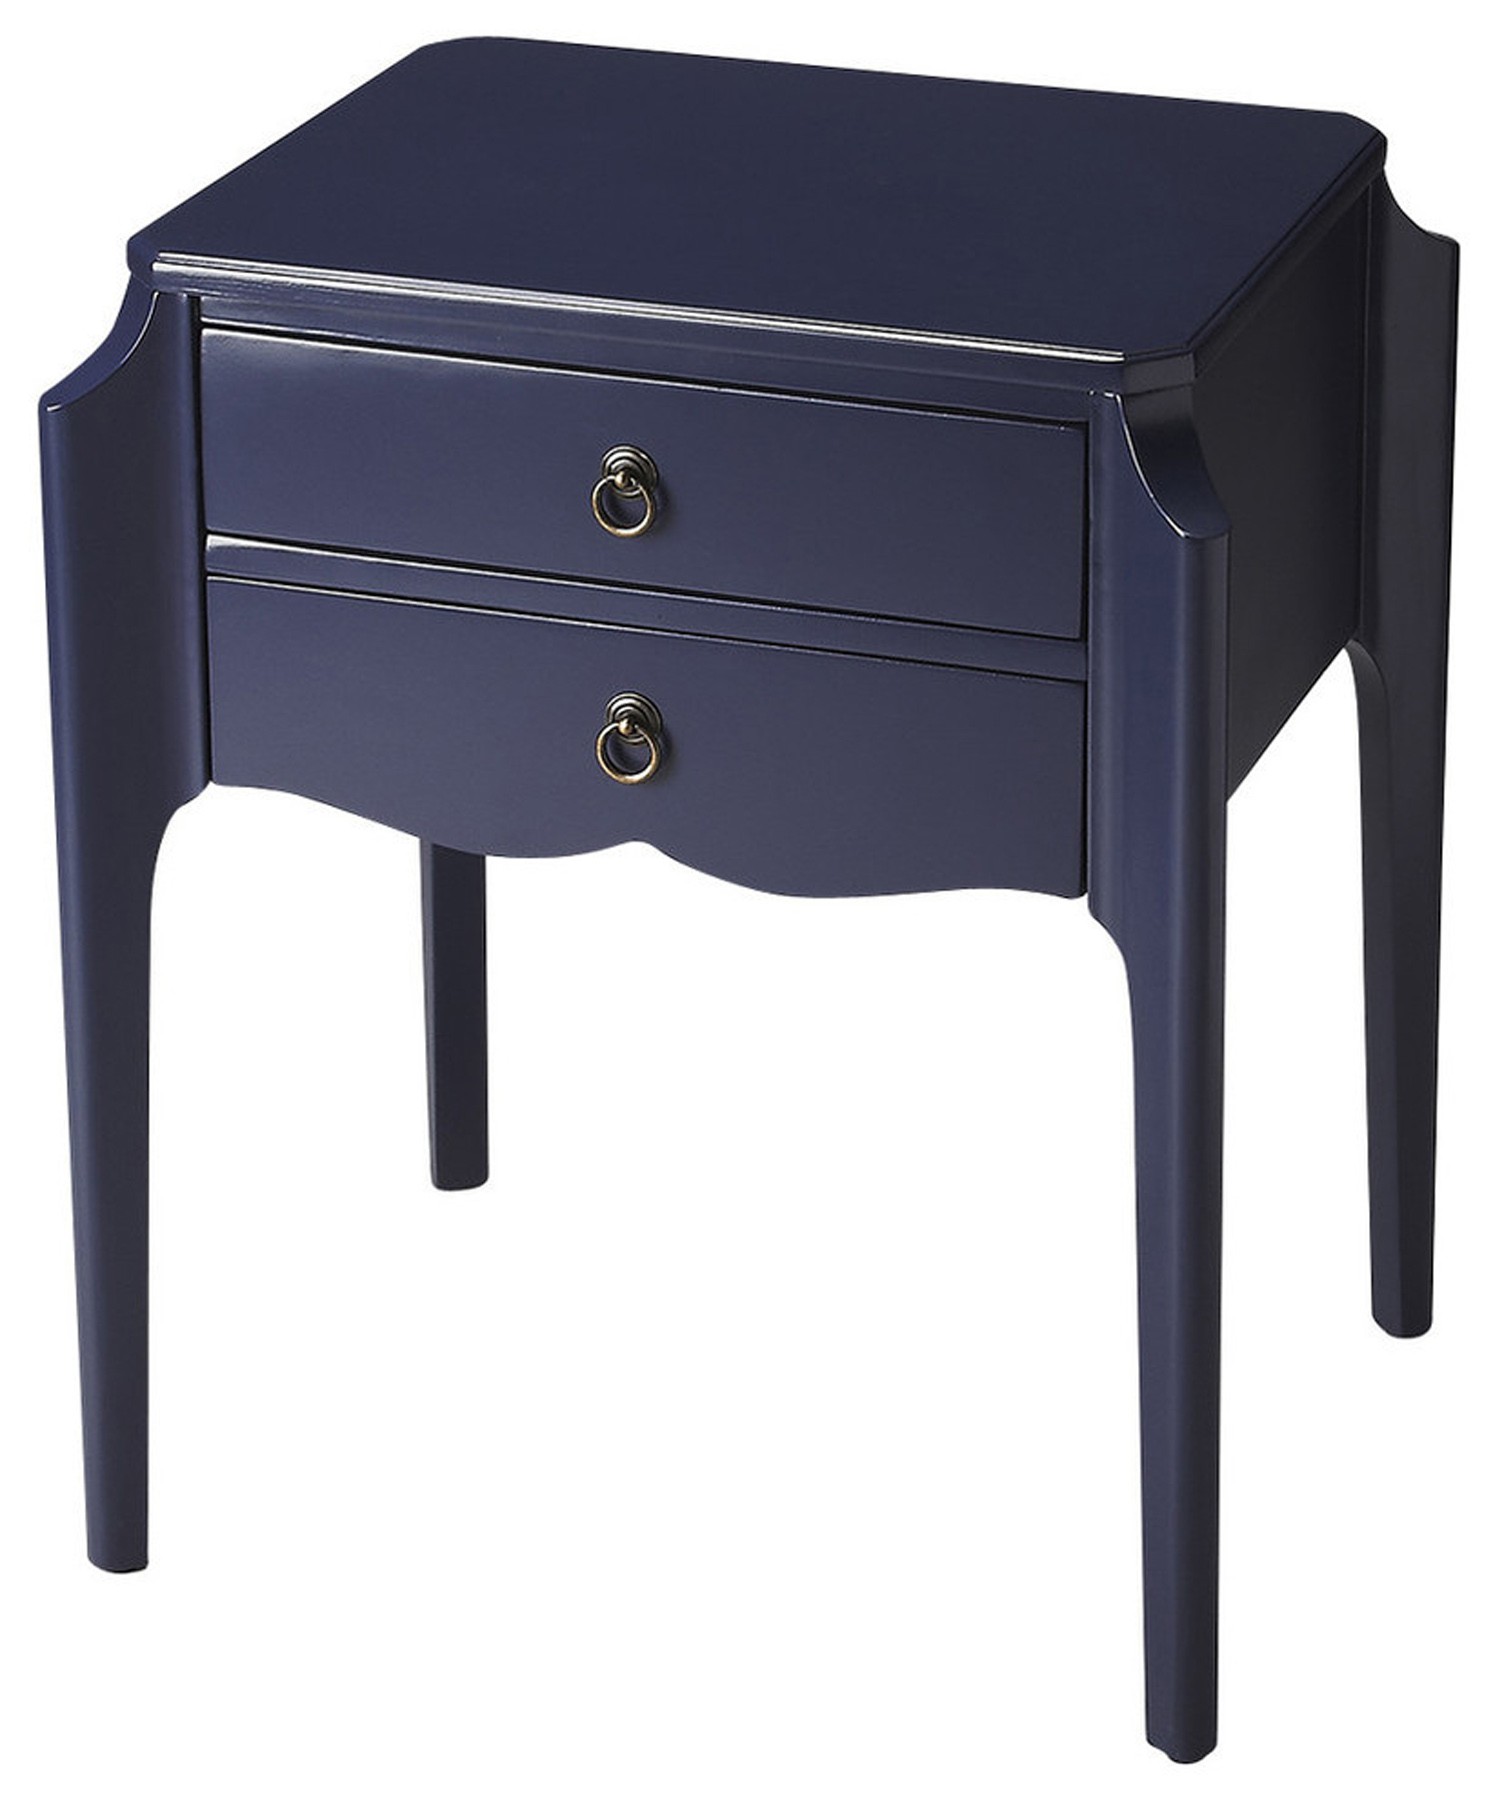 teal accent table target kitchen and living space interior butler specialty navy blue wilshire two drawer architecture modern idea purple echodigitalmedia copper marble magazine